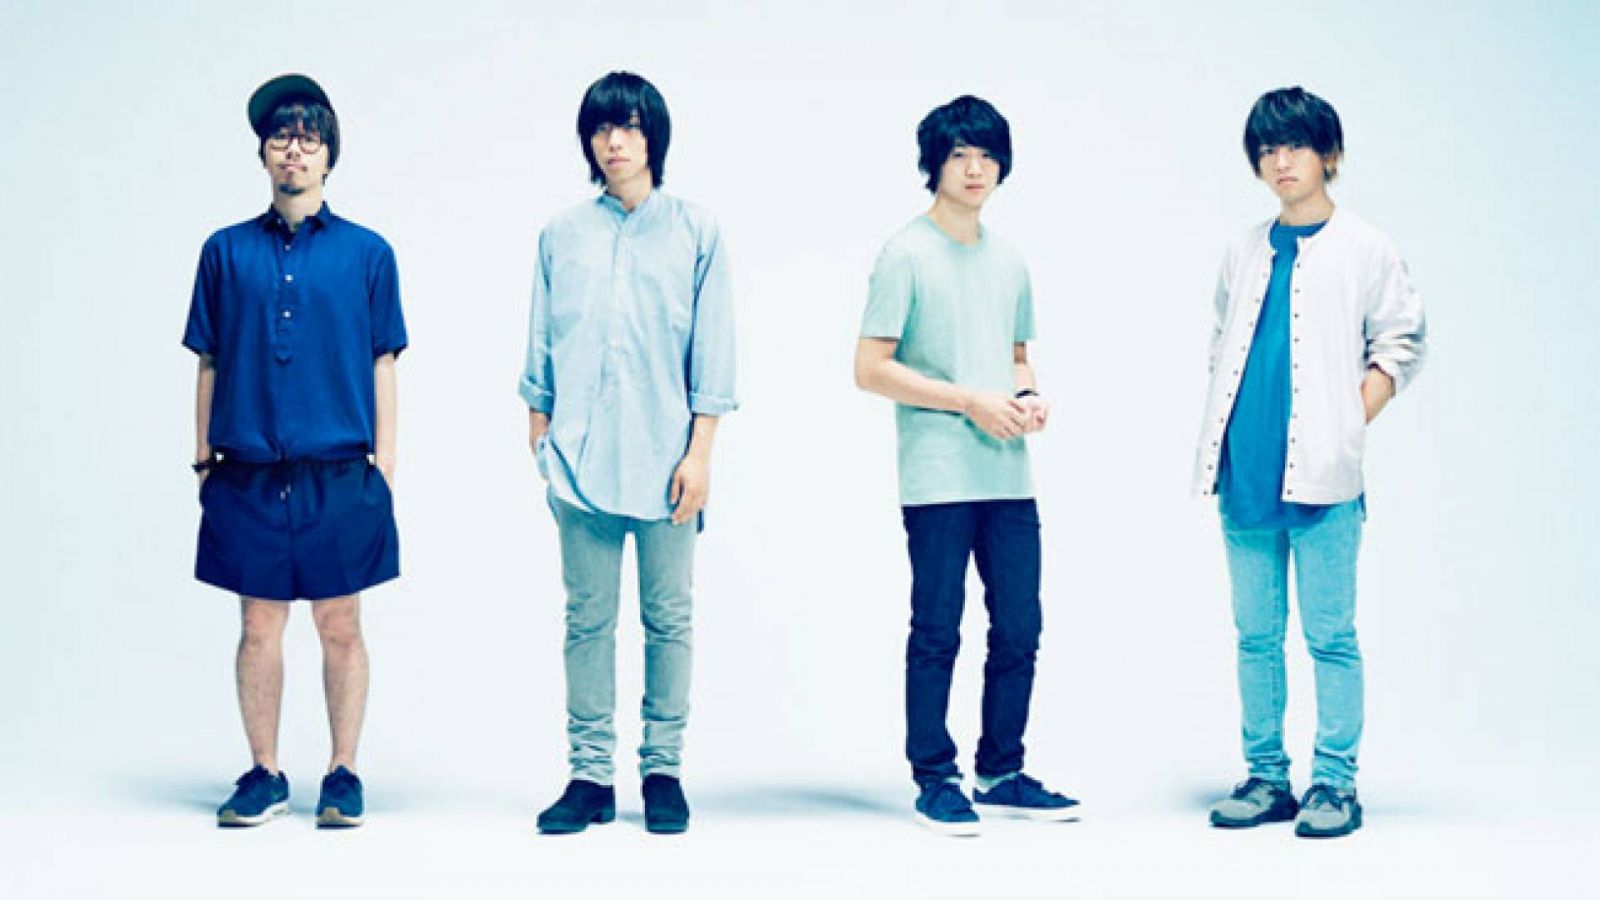 androp © androp